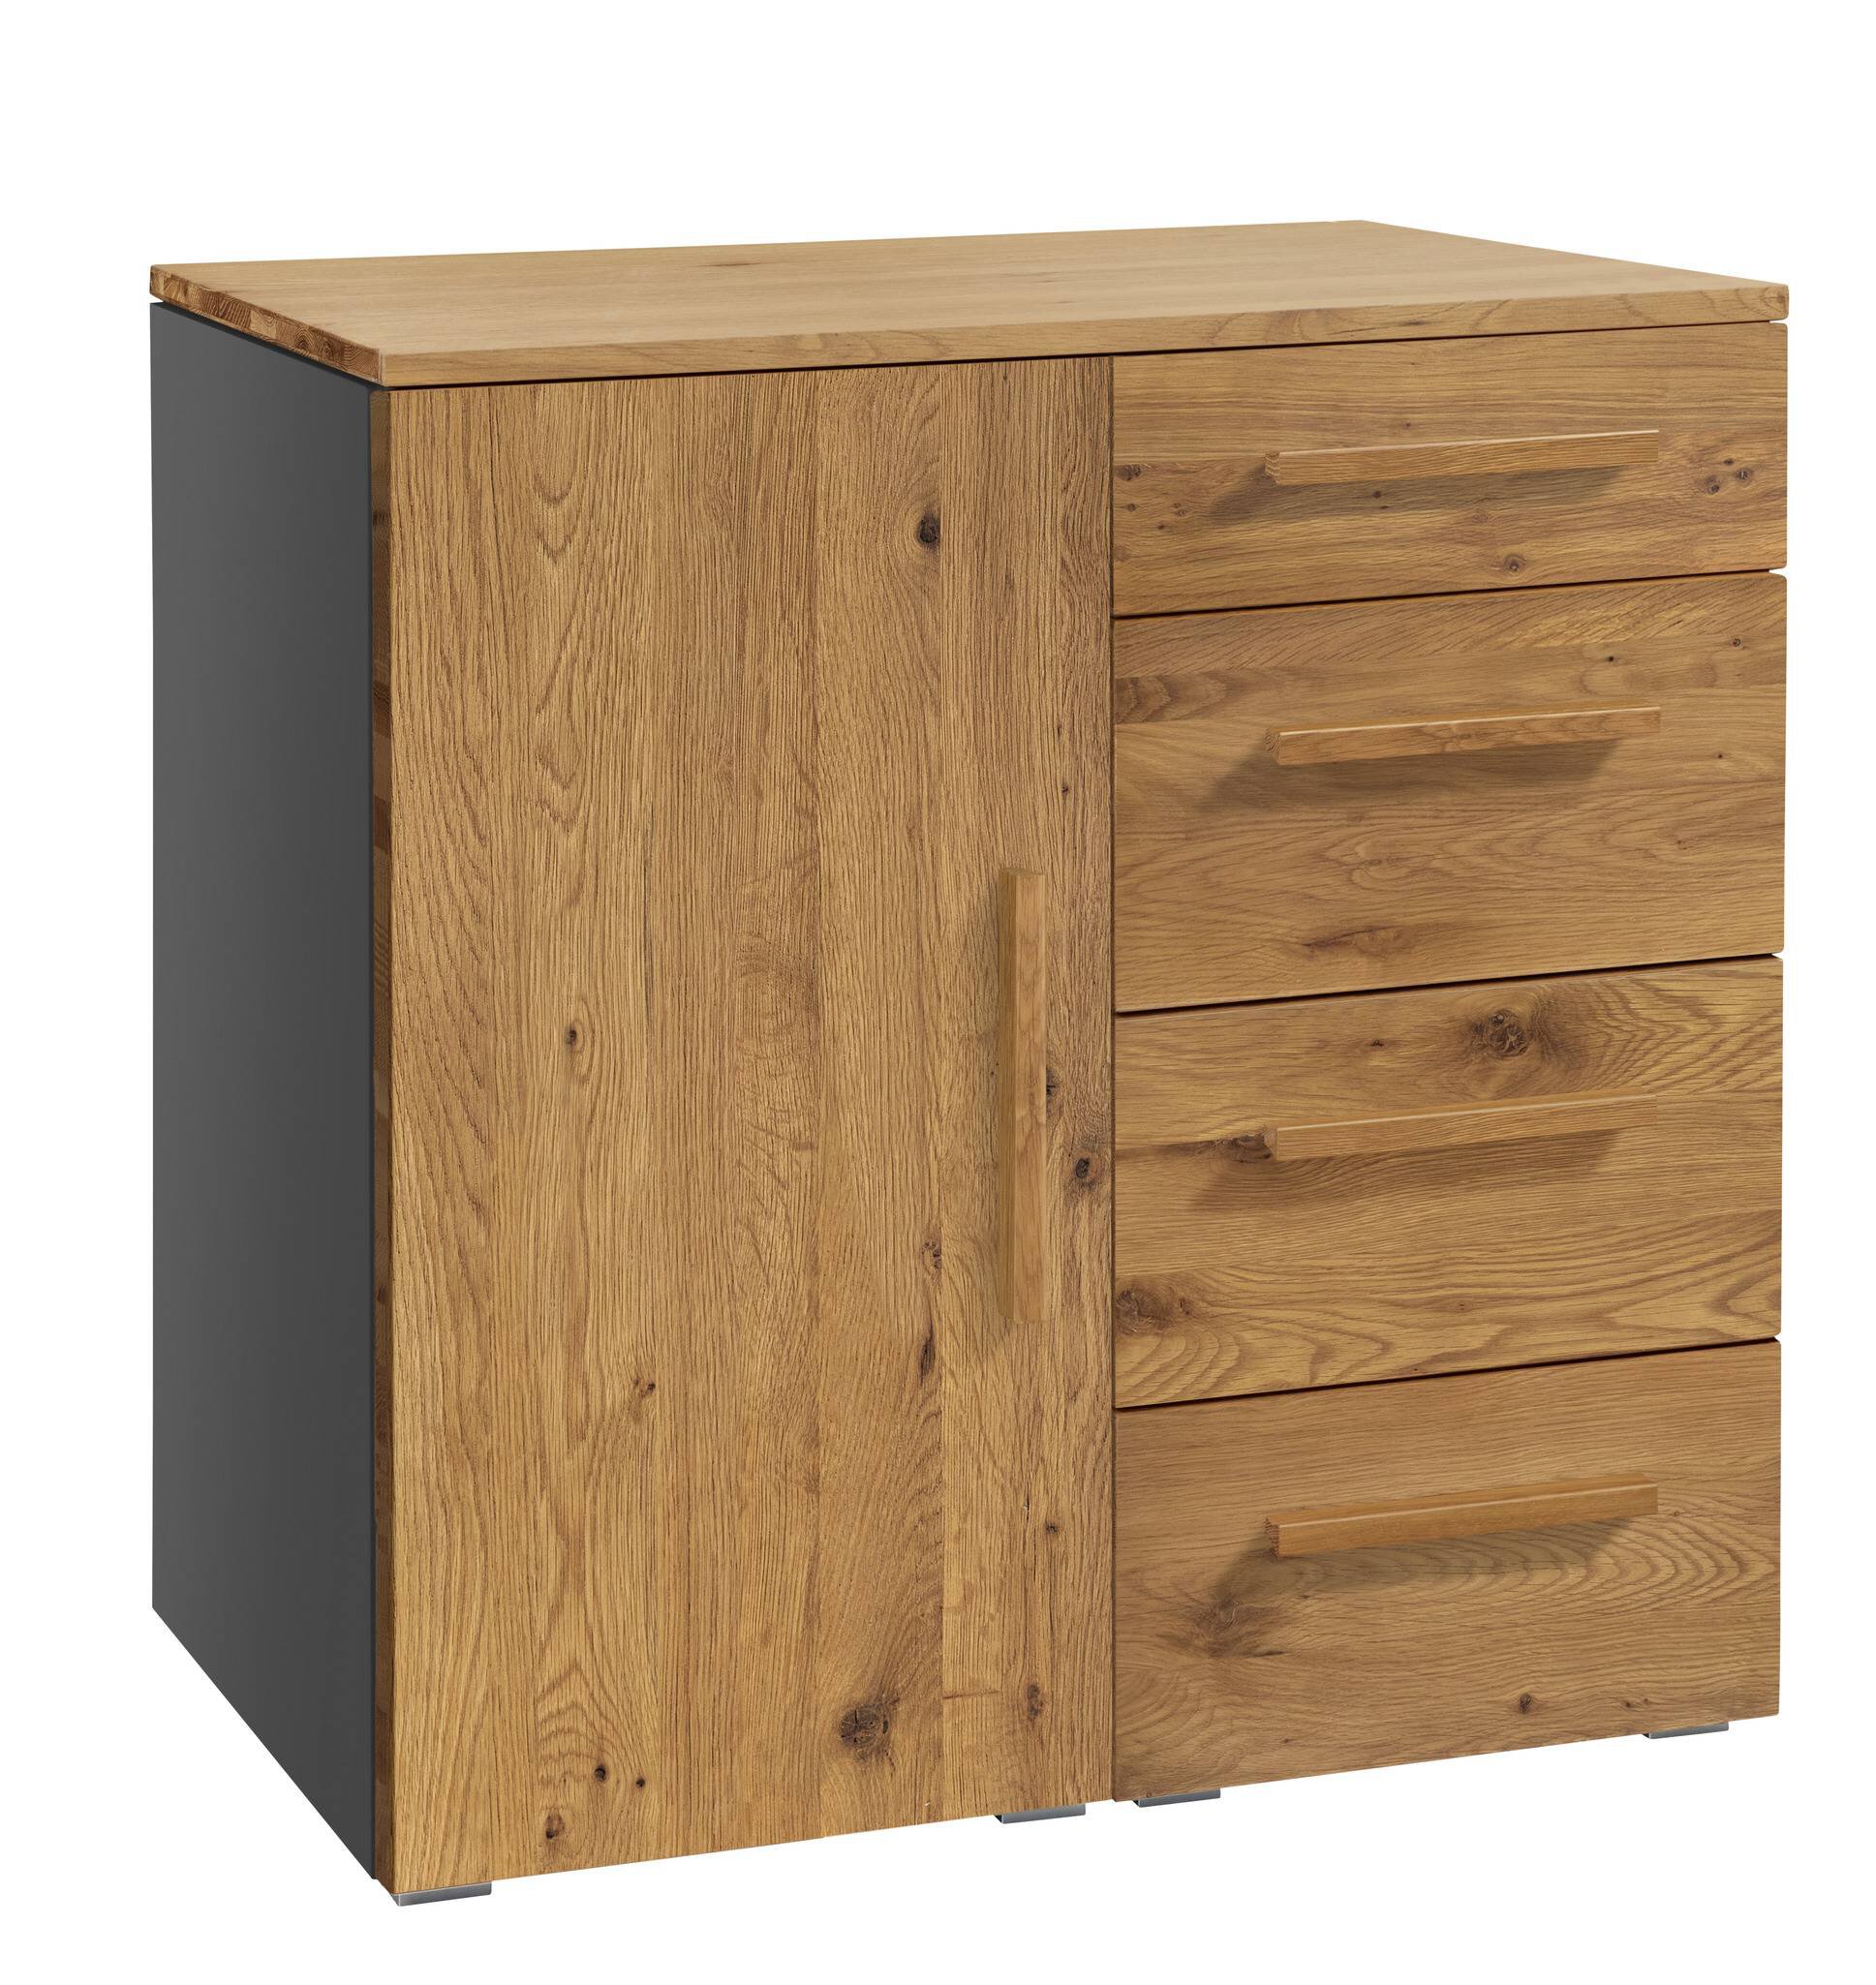 Qunito chest of drawers